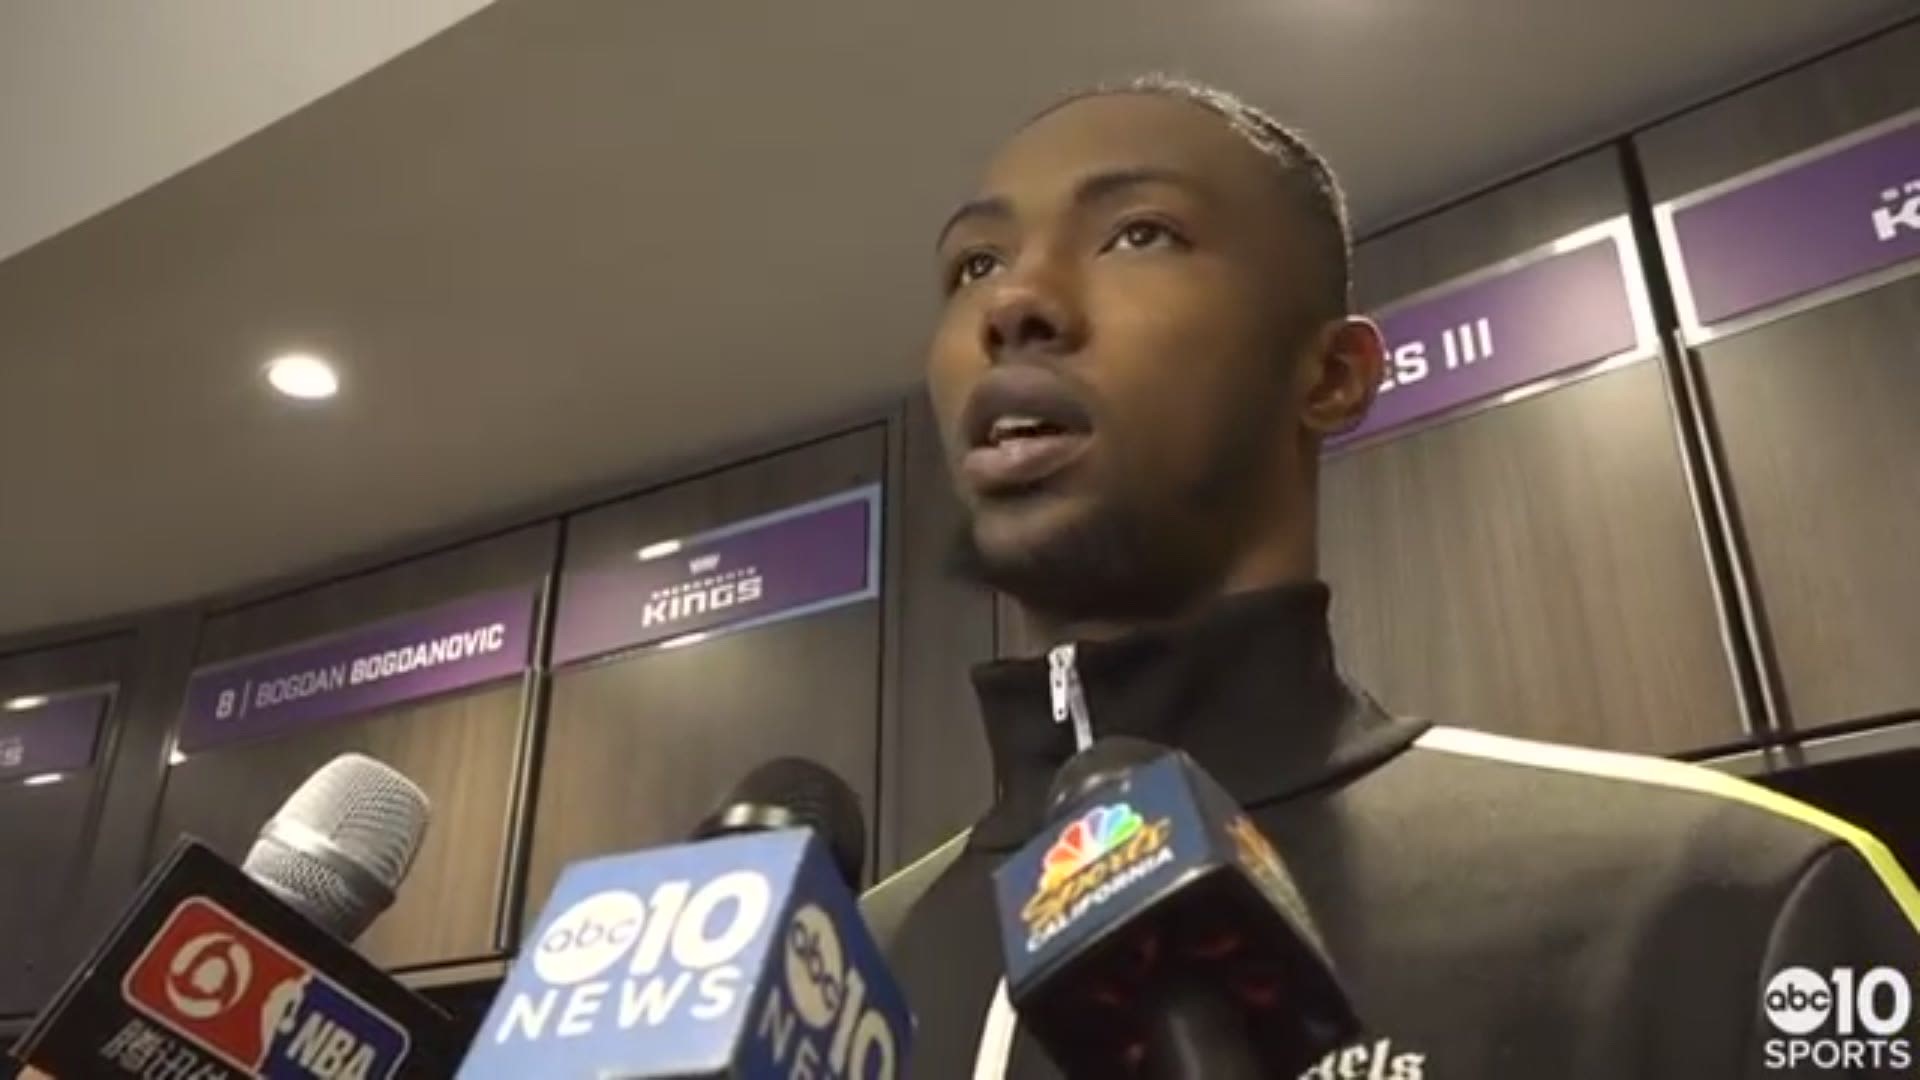 Kings F/C Harry Giles discusses Sunday's blowout victory over the Chicago Bulls, the energy he continues to bring to his Sacramento team, the evolution of his game and the impact he's had on the team this season.